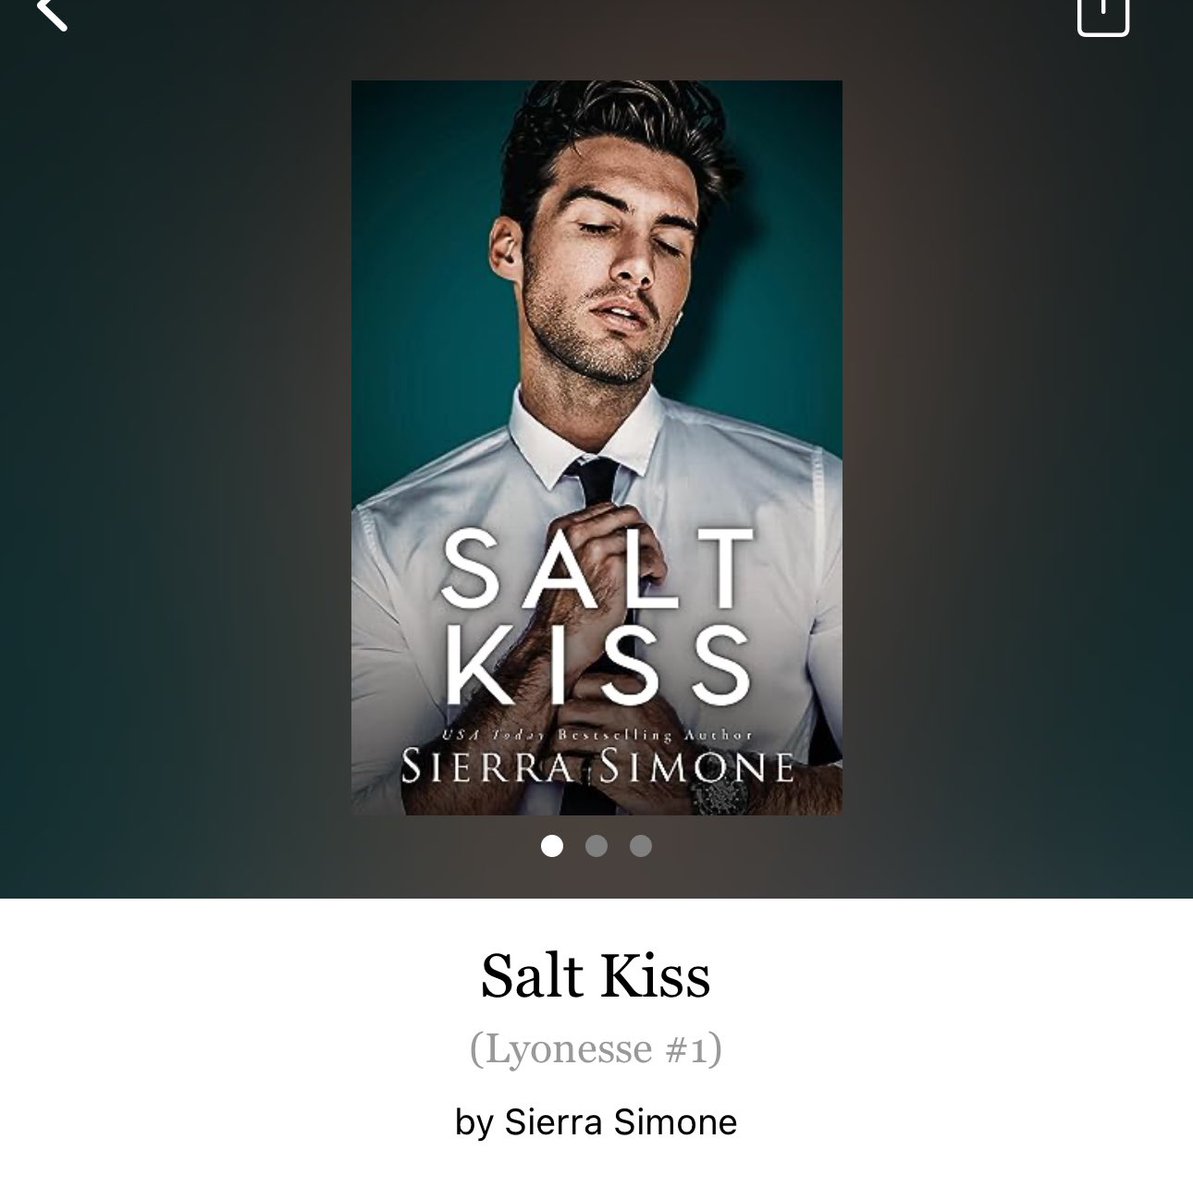 Salt Kiss by Sierra Simone 

#SaltKiss by #SierraSimone #6316 #38chapters #354pages #4654of400 #Series #audiobook #103for26 #Book1of2 #LyonessSeries #TristianAndMark #10houraudiobook #april2024 #clearingoffreadingshelves #whatsnext #readitquick